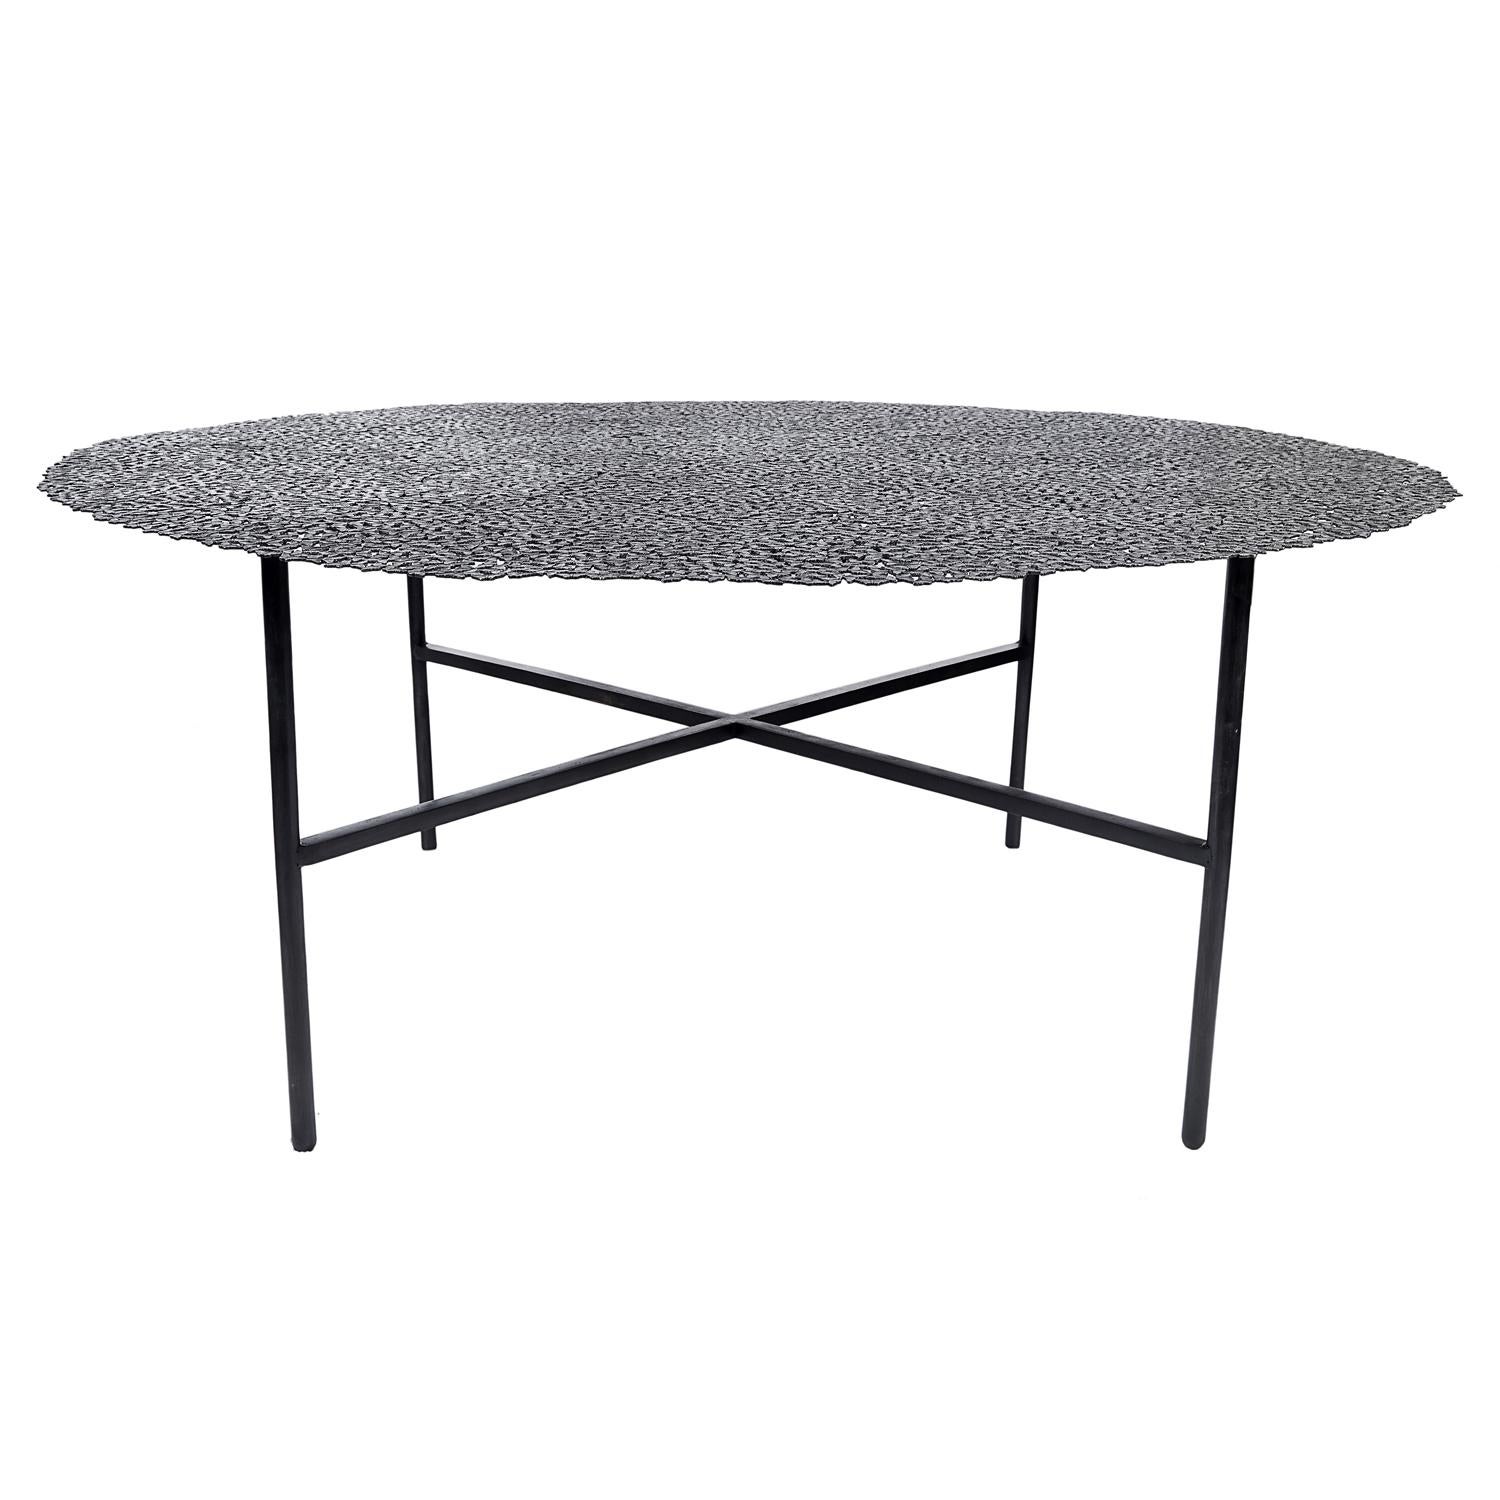 A swarm of butterflies as delicate as a lace table cloth forms an everlasting tabletop in blackened brass, lost wax cast by Italian master craftsmen. A sculptural table for both indoor and outdoor use.

Also available in bronze or white bronze. This